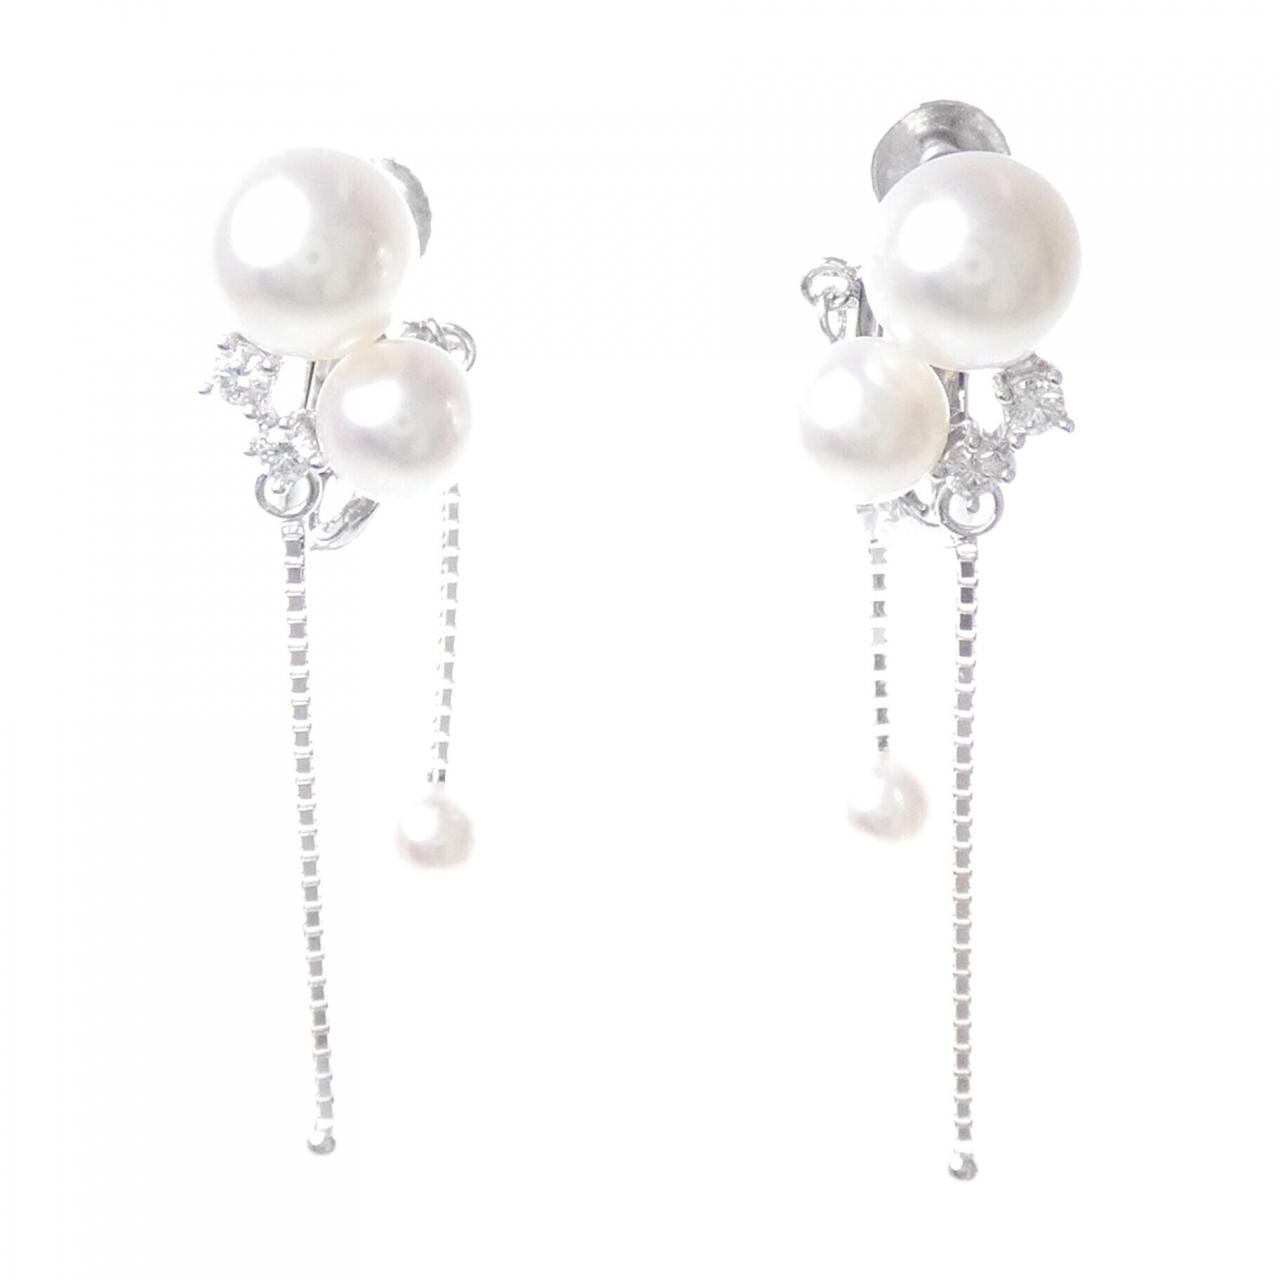 Tiffany Signature™ Pearls earrings of Akoya cultured pearls in 18k white  gold. | Tiffany & Co.